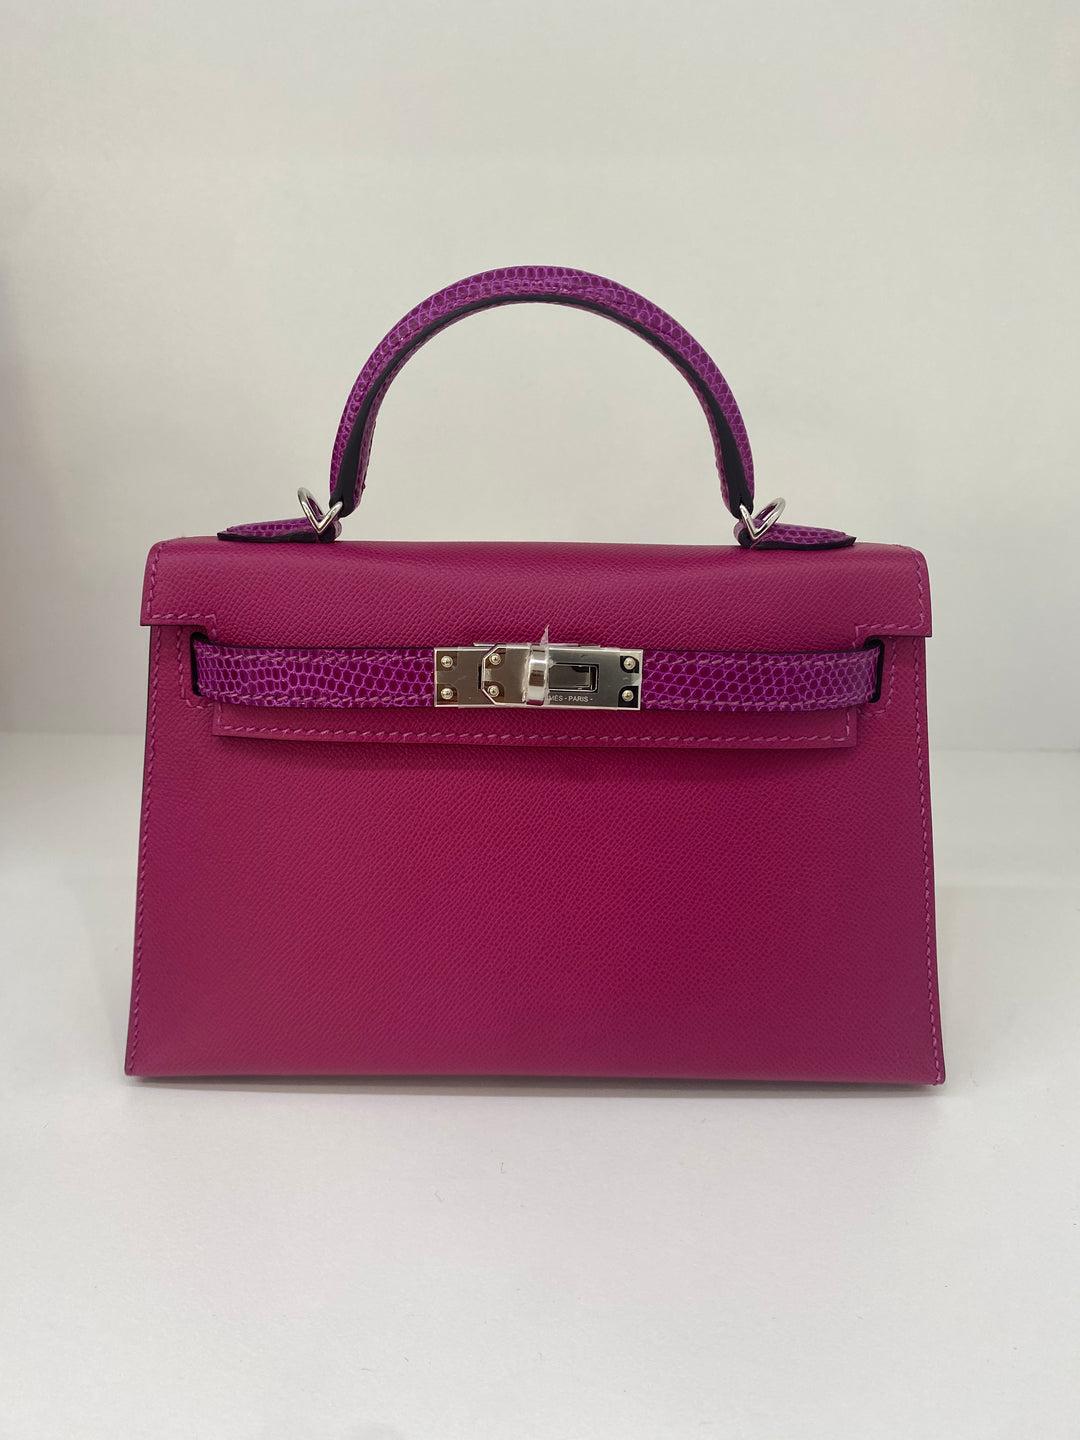 Hermes Mini Kelly Rose Pourpre - Veau madame/Lizard PHW For Sale 4